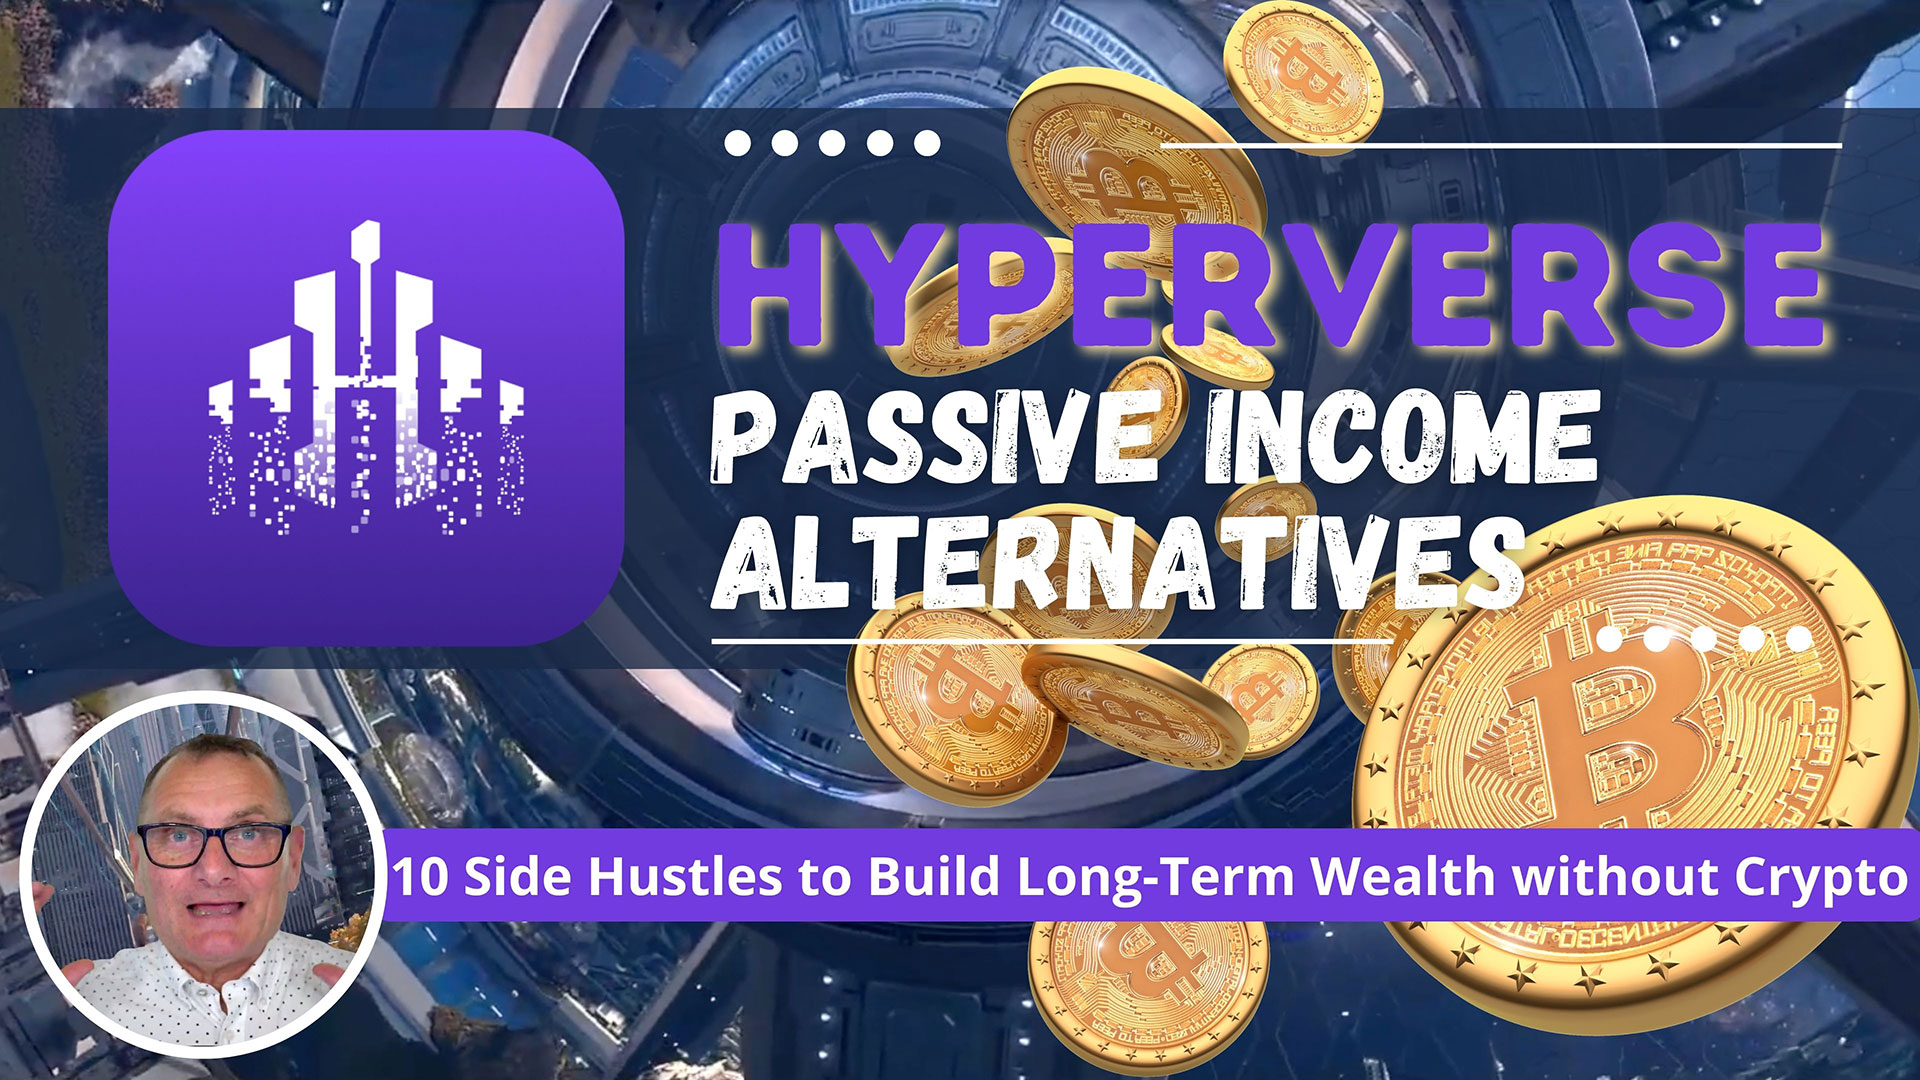 HyperVerse Passive Income Alternatives - 10 Side Hustles to Build Long Term Wealth without Crypto